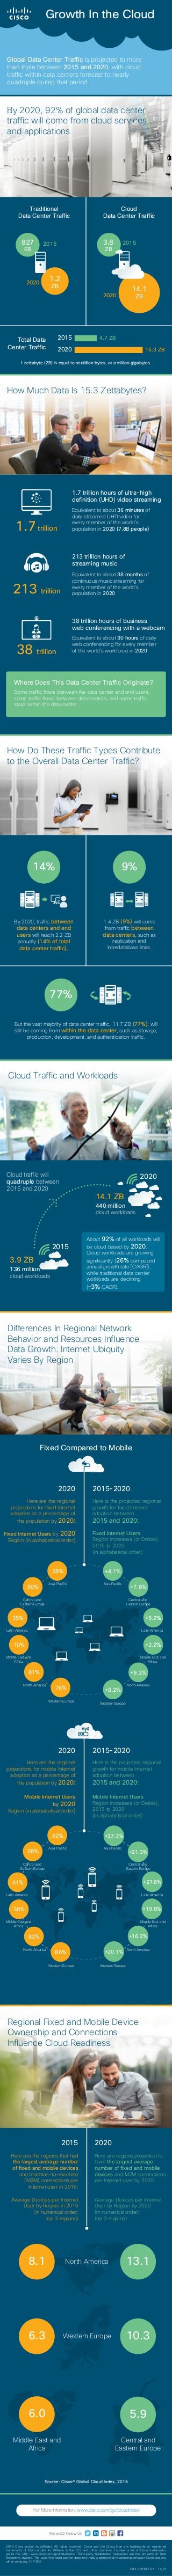 Growth In the Cloud
Global Data Center Traffic is projected to more
than triple between 2015 and 2020, with cloud
traffic within data centers forecast to nearly
quadruple during that period.
Traditional
Data Center Traffic
Cloud
Data Center Traffic
By 2020, 92% of global data center
traffic will come from cloud services
and applications
How Much Data Is 15.3 Zettabytes?
How Do These Traffic Types Contribute
to the Overall Data Center Traffic?
2015
2020
827
EB
1.2
ZB
Total Data
Center Traffic
2015
2020
4.7 ZB
15.3 ZB
2015
2020
3.8
ZB
14.1
ZB
1 zettabyte (ZB) is equal to sextillion bytes, or a trillion gigabytes.
Differences In Regional Network
Behavior and Resources Influence
Data Growth. Internet Ubiquity
Varies By Region
Regional Fixed and Mobile Device
Ownership and Connections
Influence Cloud Readiness
Here are the regions that had
the largest average number
of fixed and mobile devices
and machine-to-machine
(M2M) connections per
Internet user in 2015:
Here are regions projected to
have the largest average
number of fixed and mobile
devices and M2M connections
per Internet user by 2020:
Average Devices per Internet
User by Region by 2020
(in numerical order;
top 3 regions)
Average Devices per Internet
User by Region in 2015
(in numerical order;
top 3 regions)
14%
77%
9%
C82-735967-01 11/16
2016 Cisco and/or its affiliates. All rights reserved. Cisco and the Cisco logo are trademarks or registered
trademarks of Cisco and/or its affiliates in the U.S. and other countries. To view a list of Cisco trademarks,
go to this URL: www.cisco.com/go/trademarks. Third-party trademarks mentioned are the property of their
respective owners. The useof the word partner does not imply a partnership relationship between Cisco and any
other company. (1110R)
For More Information: www.cisco.com/go/cloudindex
#CiscoGCI Follow US
Cloud Traffic and Workloads
2015
2020
136 million
cloud workloads
3.9 ZB
440 million
cloud workloads
14.1 ZB
Cloud traffic will
quadruple between
2015 and 2020
About 92% of all workloads will
be cloud based by 2020.
Cloud workloads are growing
significantly (26% compound
annual growth rate [CAGR]),
while traditional data center
workloads are declining
(–3% CAGR).
Source: Cisco® Global Cloud Index, 2016
2015 2020
Fixed Compared to Mobile
8.1 13.1North America
6.3 10.3
5.9
Western Europe
6.0
Middle East and
Africa
Central and
Eastern Europe
1.7 trillion hours of ultra-high
definition (UHD) video streaming
213 trillion hours of
streaming music
38 trillion hours of business
web conferencing with a webcam
Equivalent to about 36 minutes of
daily streamed UHD video for
every member of the world’s
population in 2020 (7.8B people)
Equivalent to about 38 months of
continuous music streaming for
every member of the world’s
population in 2020
Equivalent to about 30 hours of daily
web conferencing for every member
of the world’s workforce in 2020
1.7trillion
213 trillion
38 trillion
Some traffic flows between the data center and end users,
some traffic flows between data centers, and some traffic
stays within the data center.
Where Does This Data Center Traffic Originate?
By 2020, traffic between
data centers and end
users will reach 2.2 ZB
annually (14% of total
data center traffic).
1.4 ZB (9%) will come
from traffic between
data centers, such as
replication and
interdatabase links.
But the vast majority of data center traffic, 11.7 ZB (77%), will
still be coming from within the data center, such as storage,
production, development, and authentication traffic.
Here are the regional
projections for fixed Internet
adoption as a percentage of
the population by 2020:
Here is the projected regional
growth for fixed Internet
adoption between
2015 and 2020:
Fixed Internet Users
Region Increases (or Deltas),
2015 to 2020
(in alphabetical order)
Fixed Internet Users by 2020
Region (in alphabetical order)
2015-20202020
Here are the regional
projections for mobile Internet
adoption as a percentage of
the population by 2020:
Here is the projected regional
growth for mobile Internet
adoption between
2015 and 2020:
Mobile Internet Users
Region Increases (or Deltas),
2015 to 2020
(in alphabetical order)
Mobile Internet Users
by 2020
Region (in alphabetical order)
2015-20202020
+21.3%
+27.3%
+27.8%
+19.8%
+16.2%
+20.1%
Asia Pacific
Central and
Eastern Europe
Latin America
Middle East and
Africa
North America
Western Europe
Asia Pacific
Central and
Eastern Europe
Latin America
Middle East and
Africa
North America
Western Europe
62%
58%
61%
38%
82%
86%
+7.6%
+4.1%
+5.2%
+2.2%
+9.2%
+8.2%
Asia Pacific
Central and
Eastern Europe
Latin America
Middle East and
Africa
North America
Western Europe
Asia Pacific
Central and
Eastern Europe
Latin America
Middle East and
Africa
North America
Western Europe
28%
50%
35%
10%
81%
76%
 